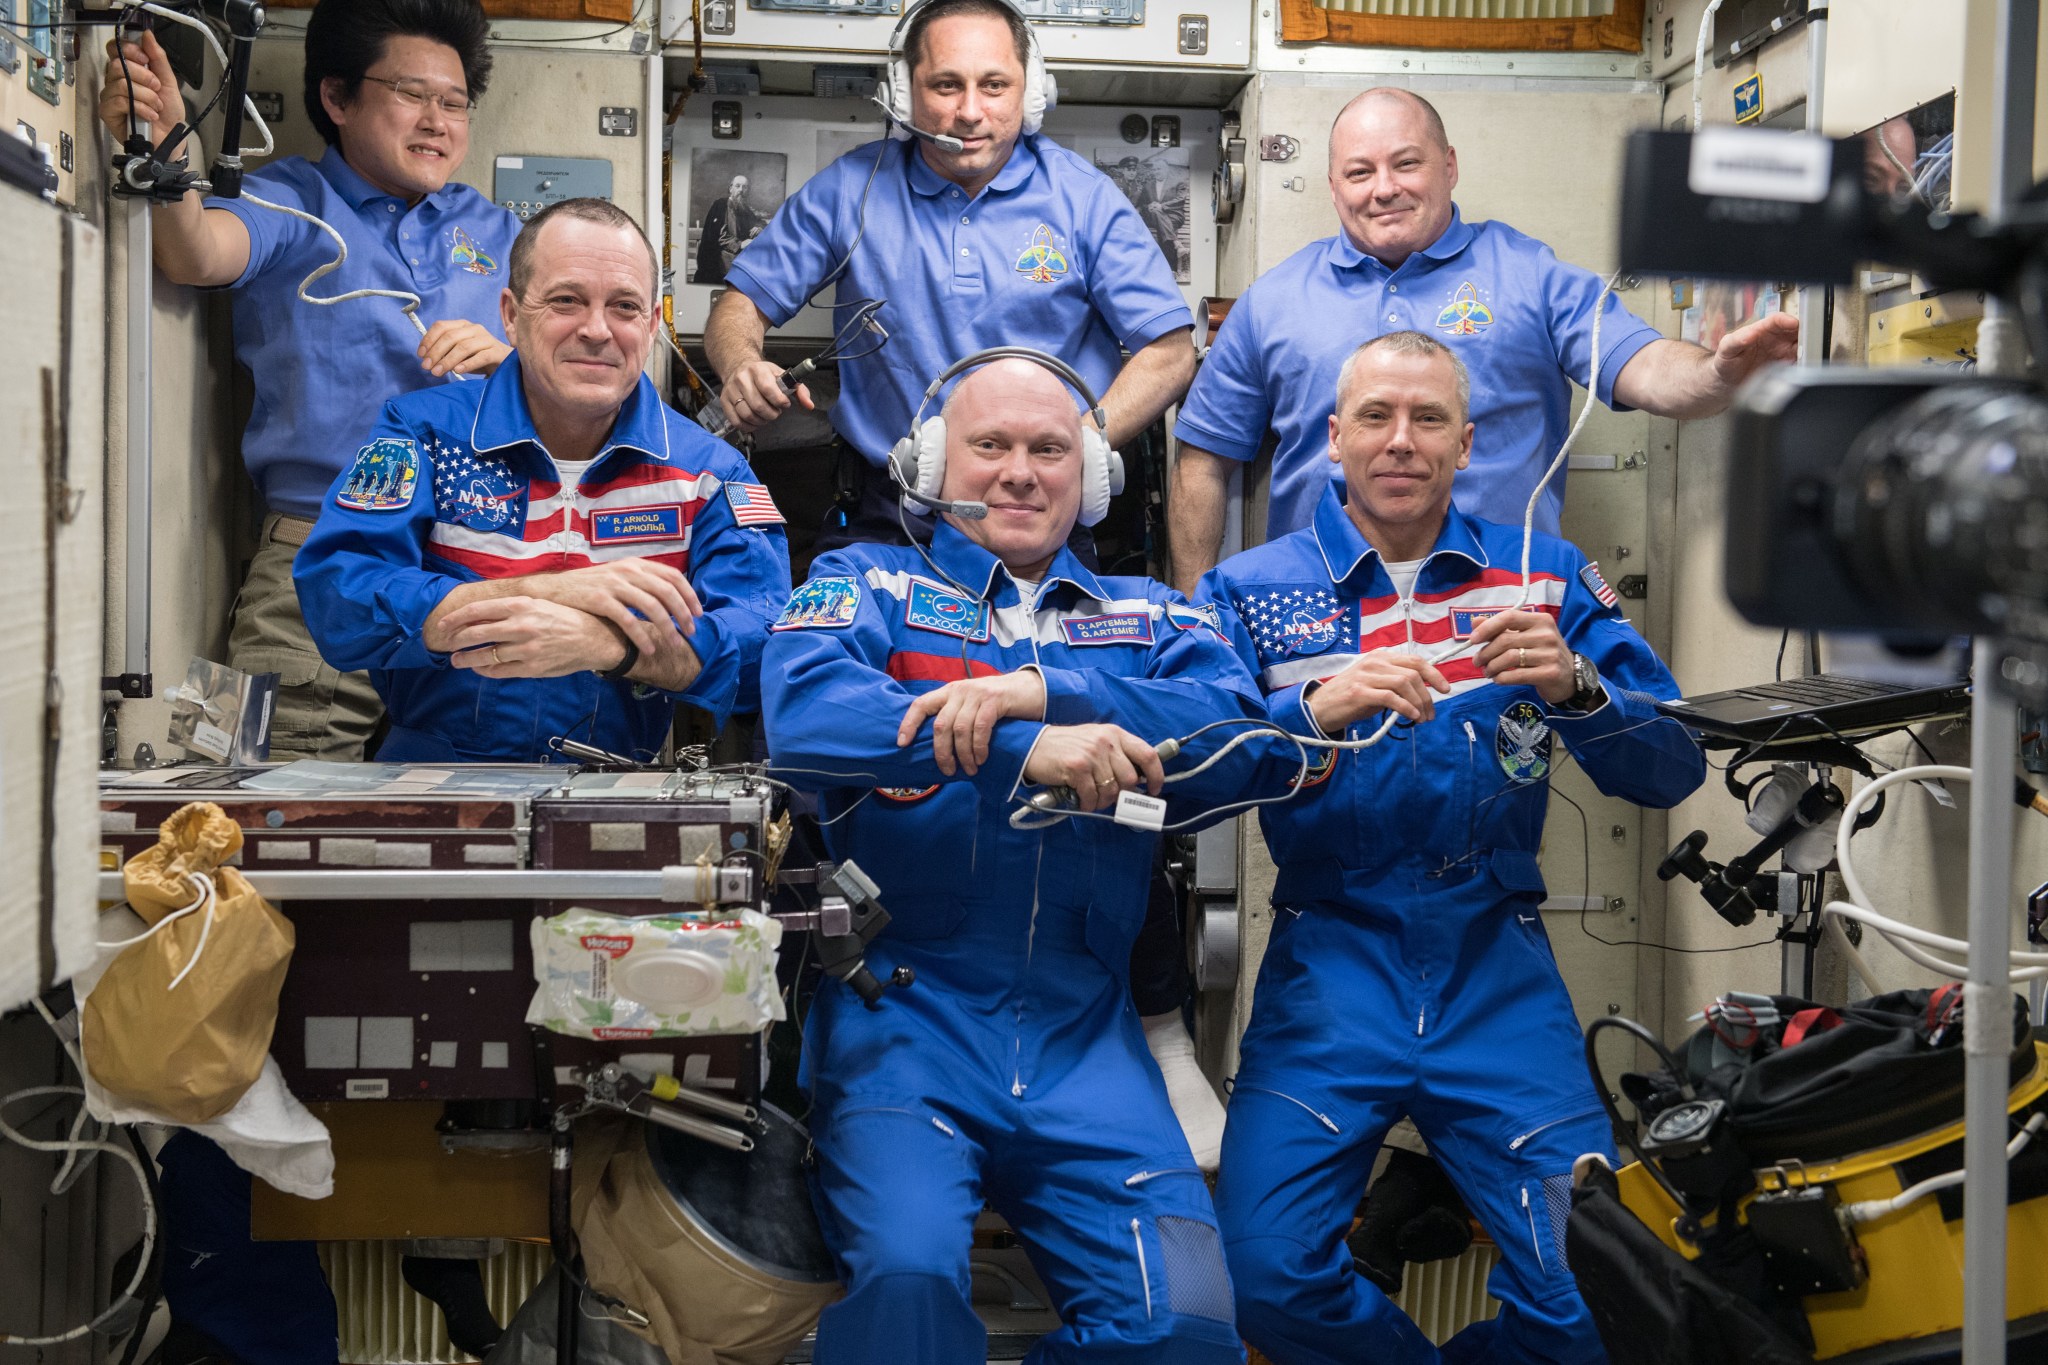 The Expedition 55 crew, including NASA astronauts Ricky Arnold, Drew Feustel and Scott Tingle.